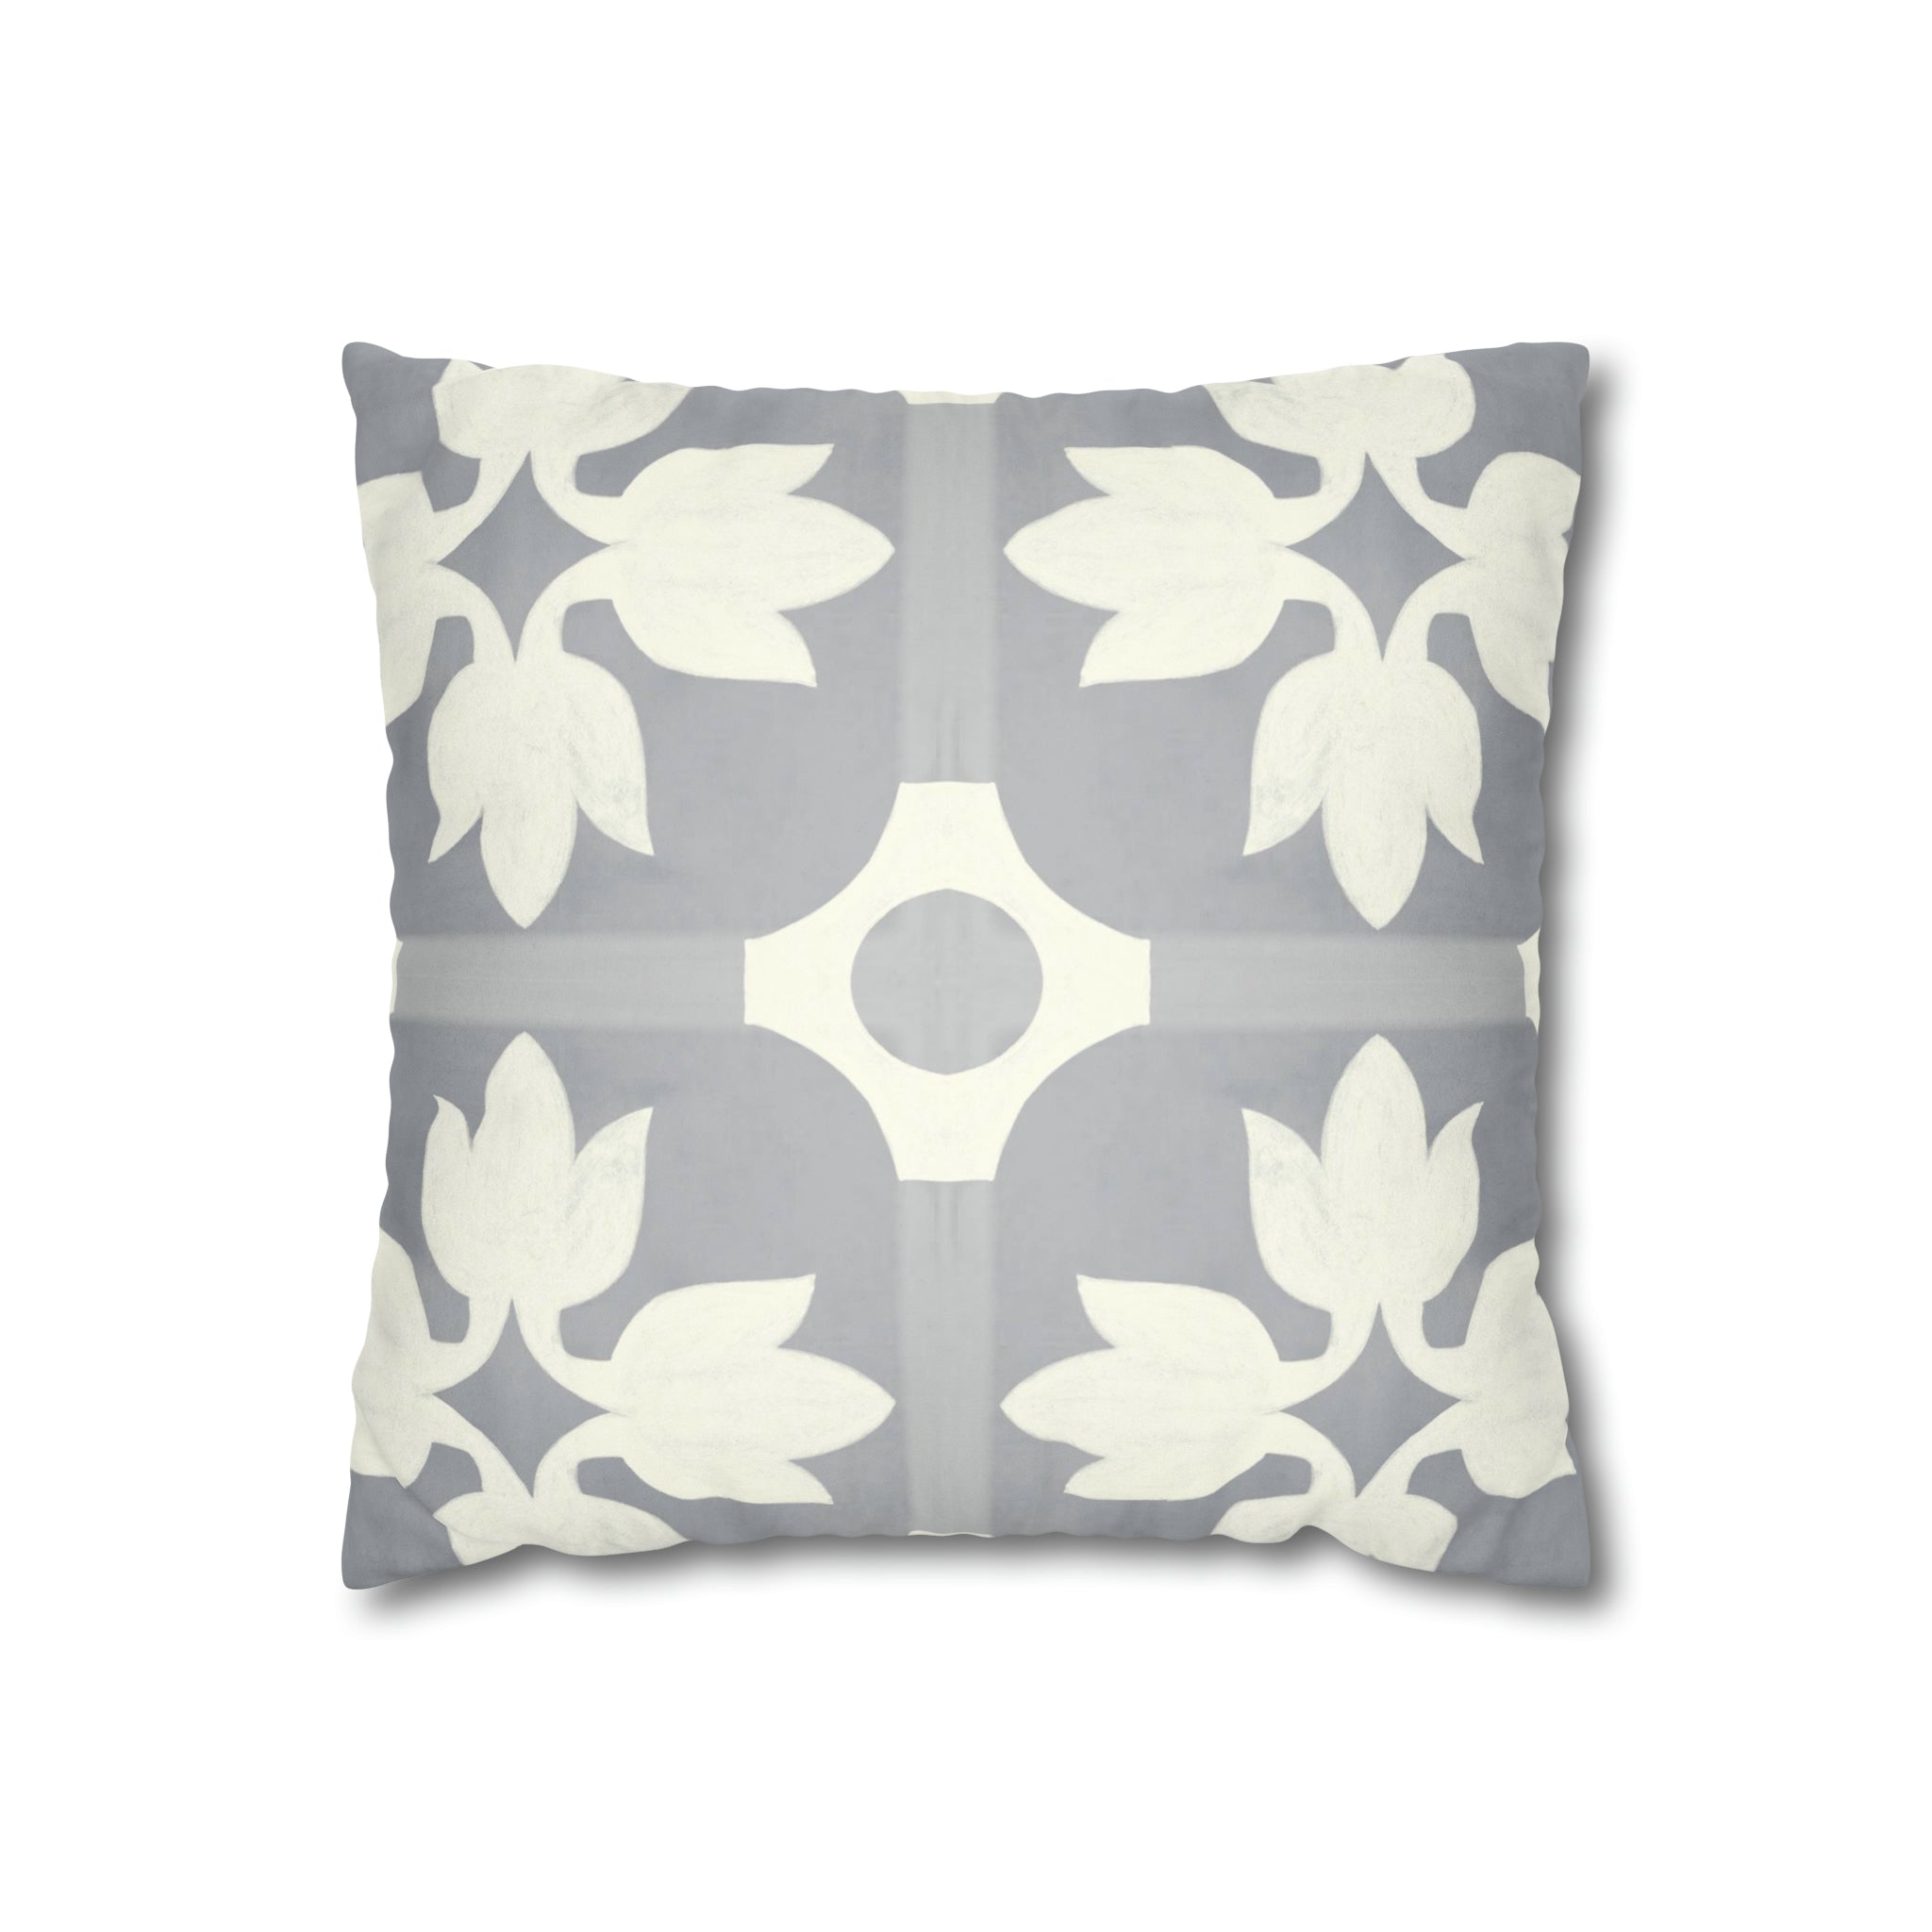 Margot Slate Microsuede Square Pillow Cover